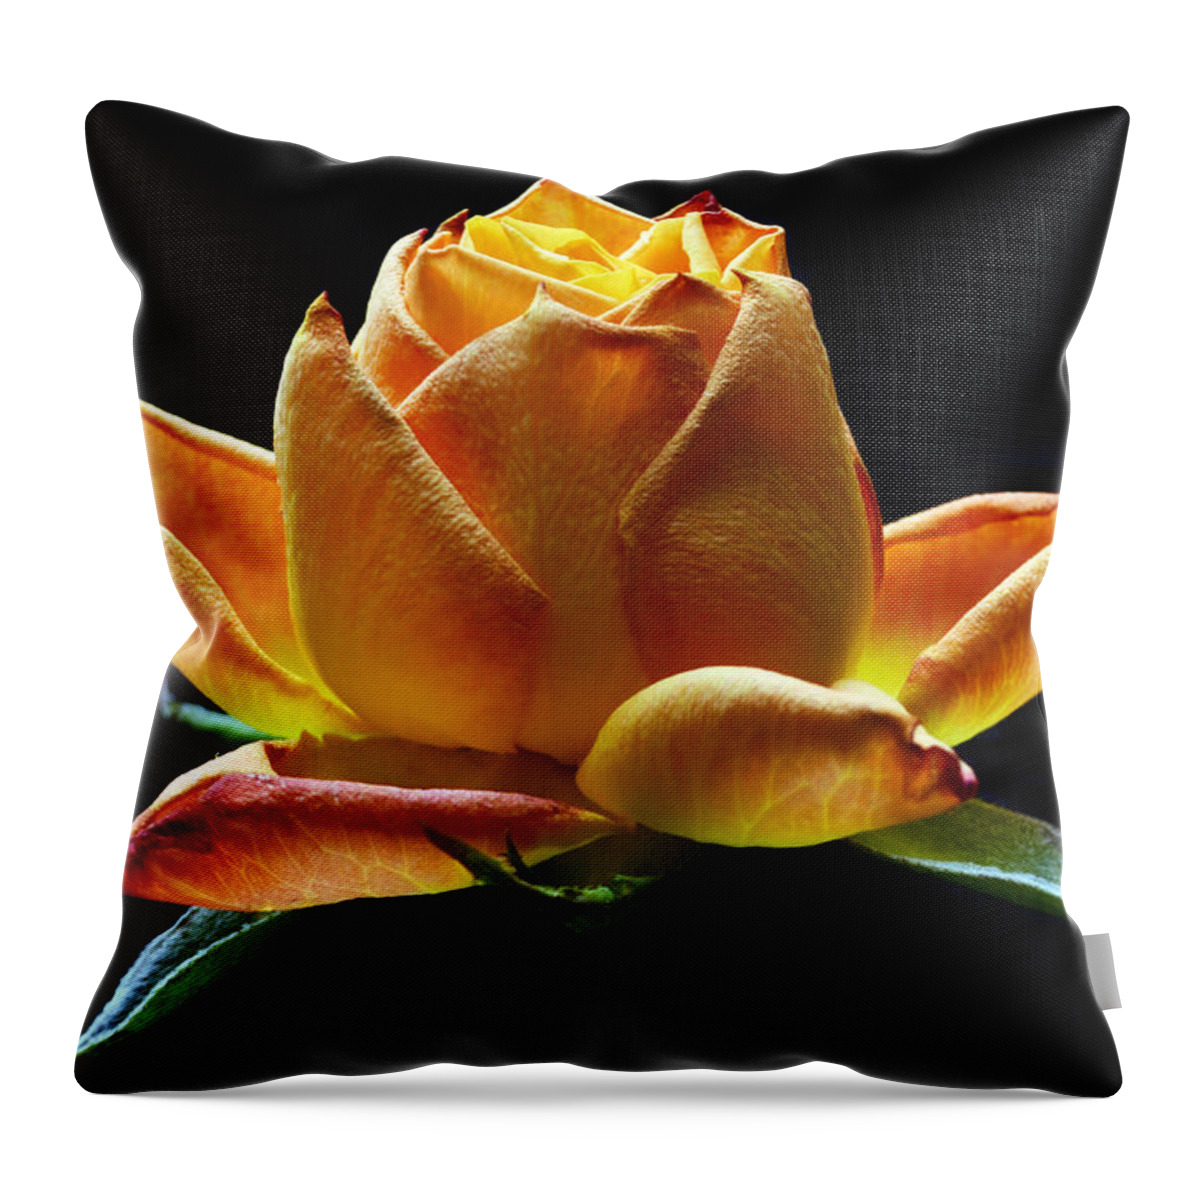 Rose Throw Pillow featuring the photograph Fire Rose by Terence Davis